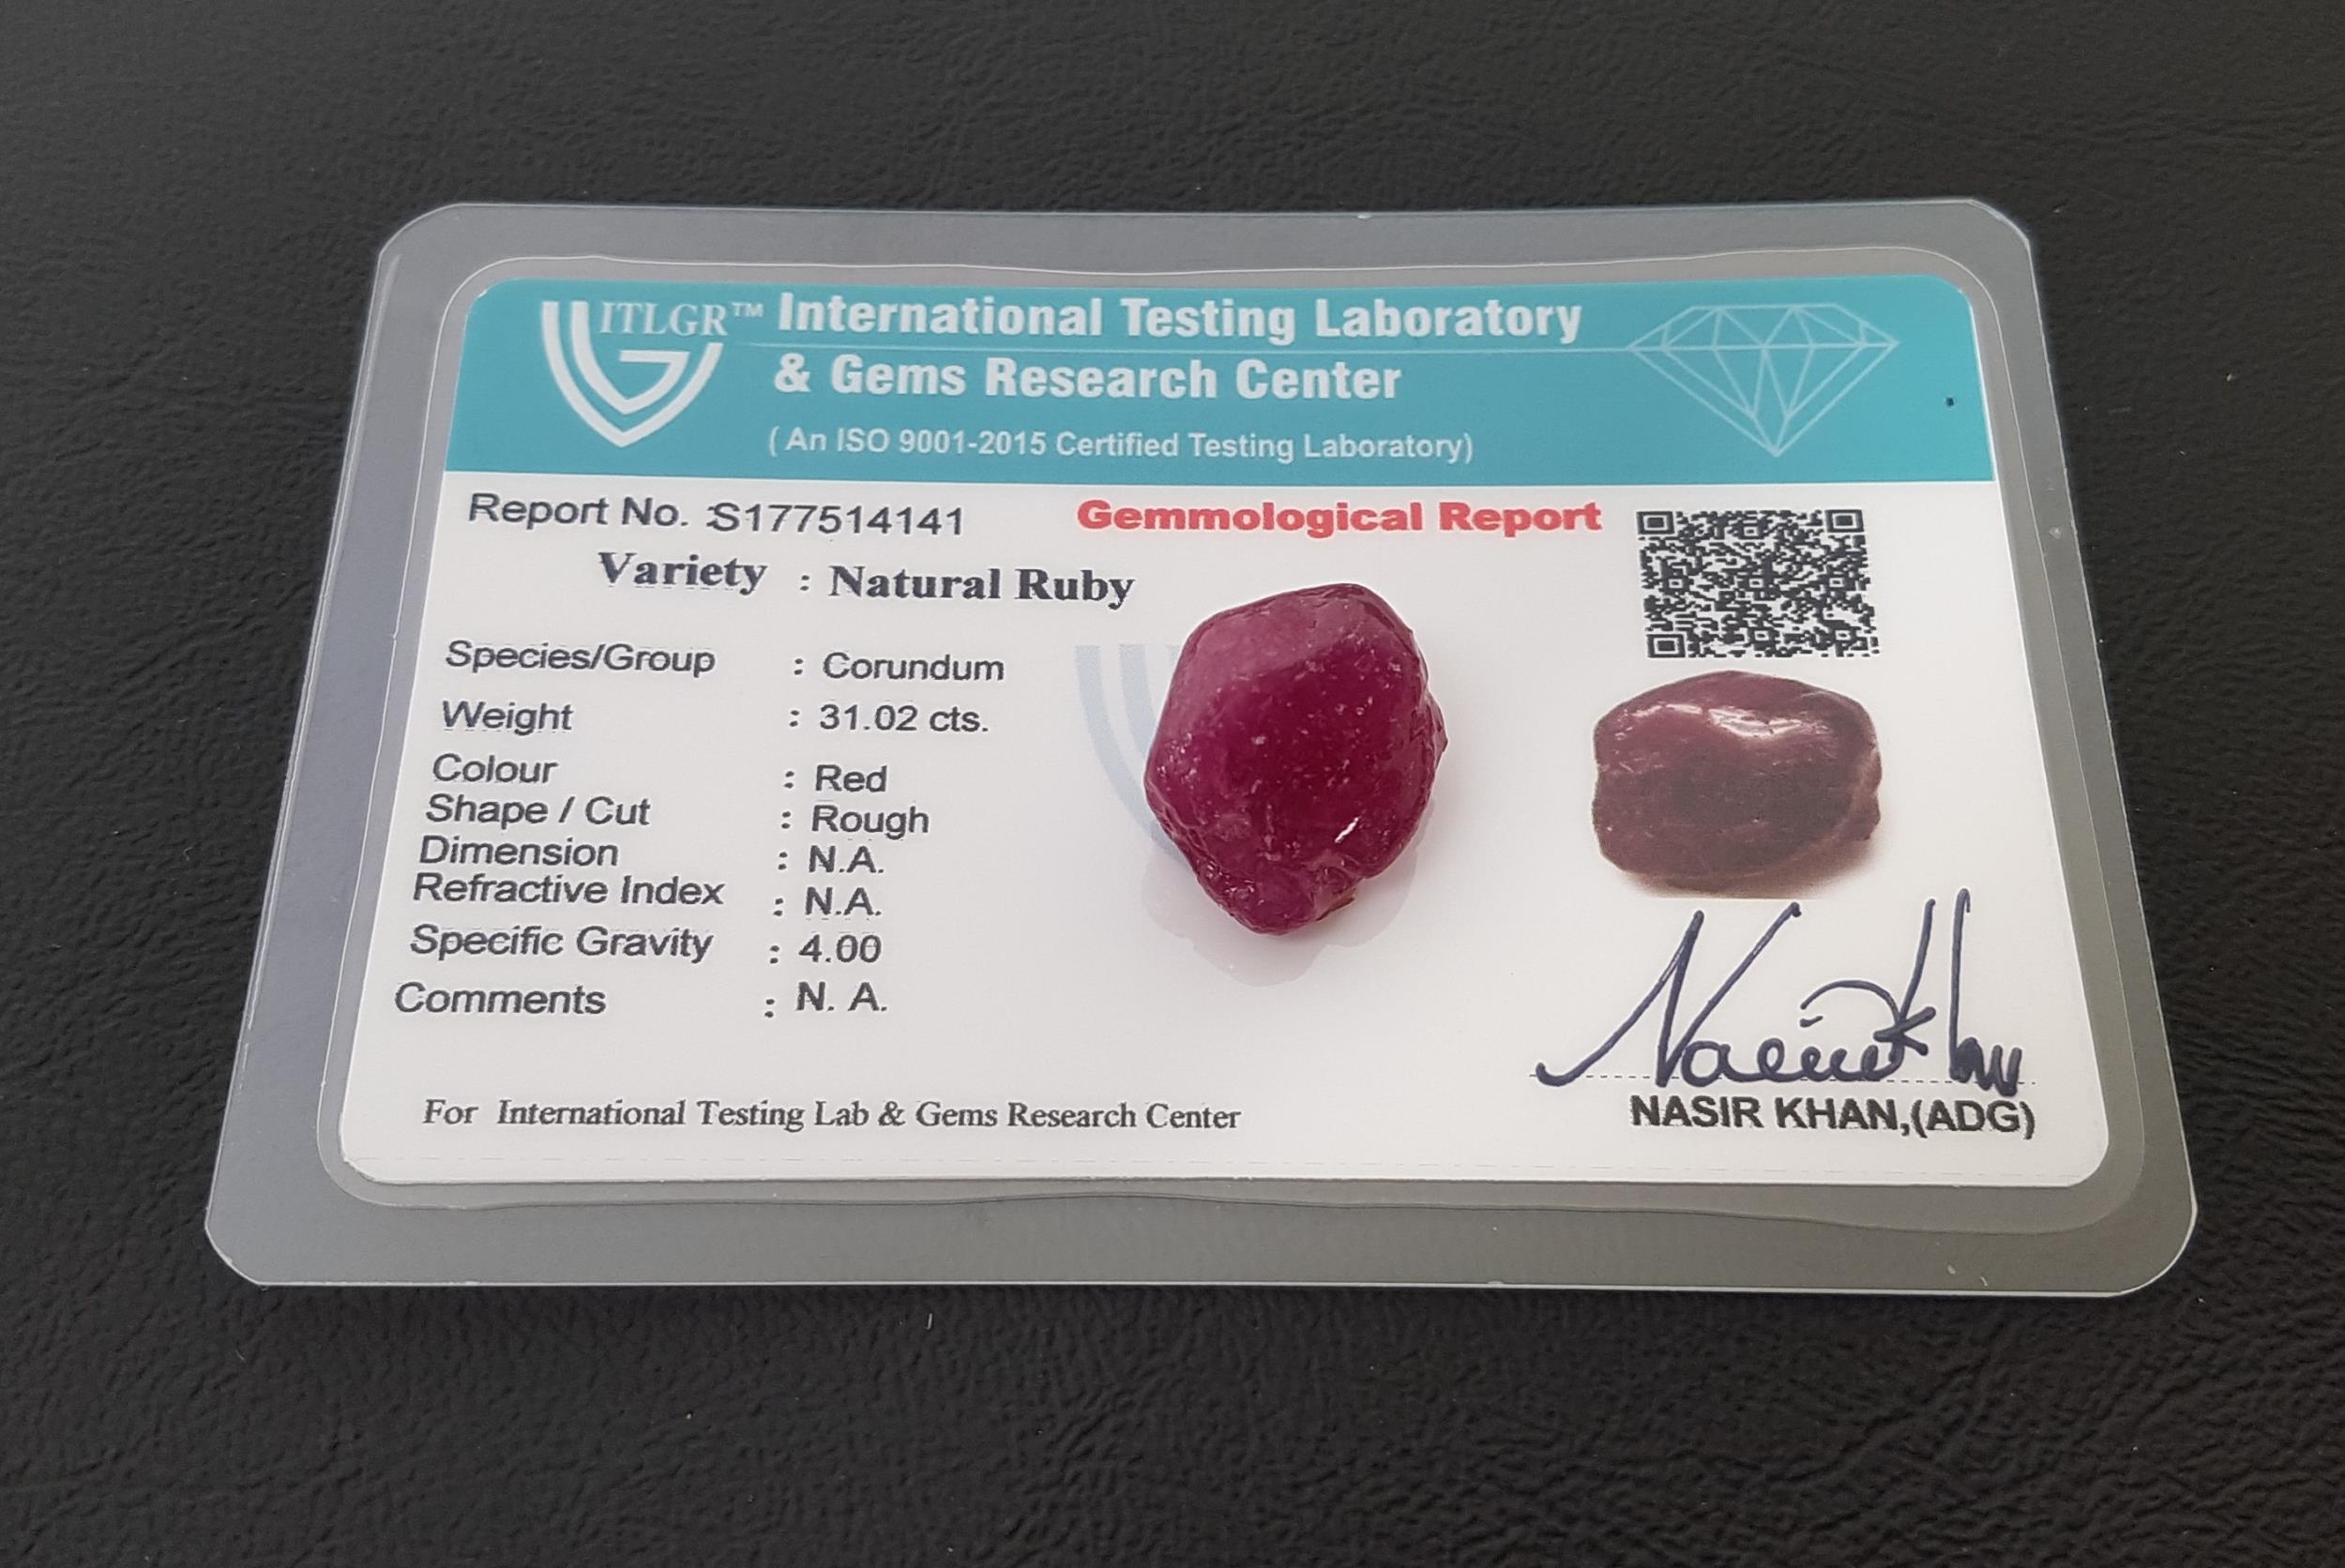 CERTIFIED LOOSE NATURAL RUBY the rough cut ruby weighing 31cts, with ITLGR Gemmological Report